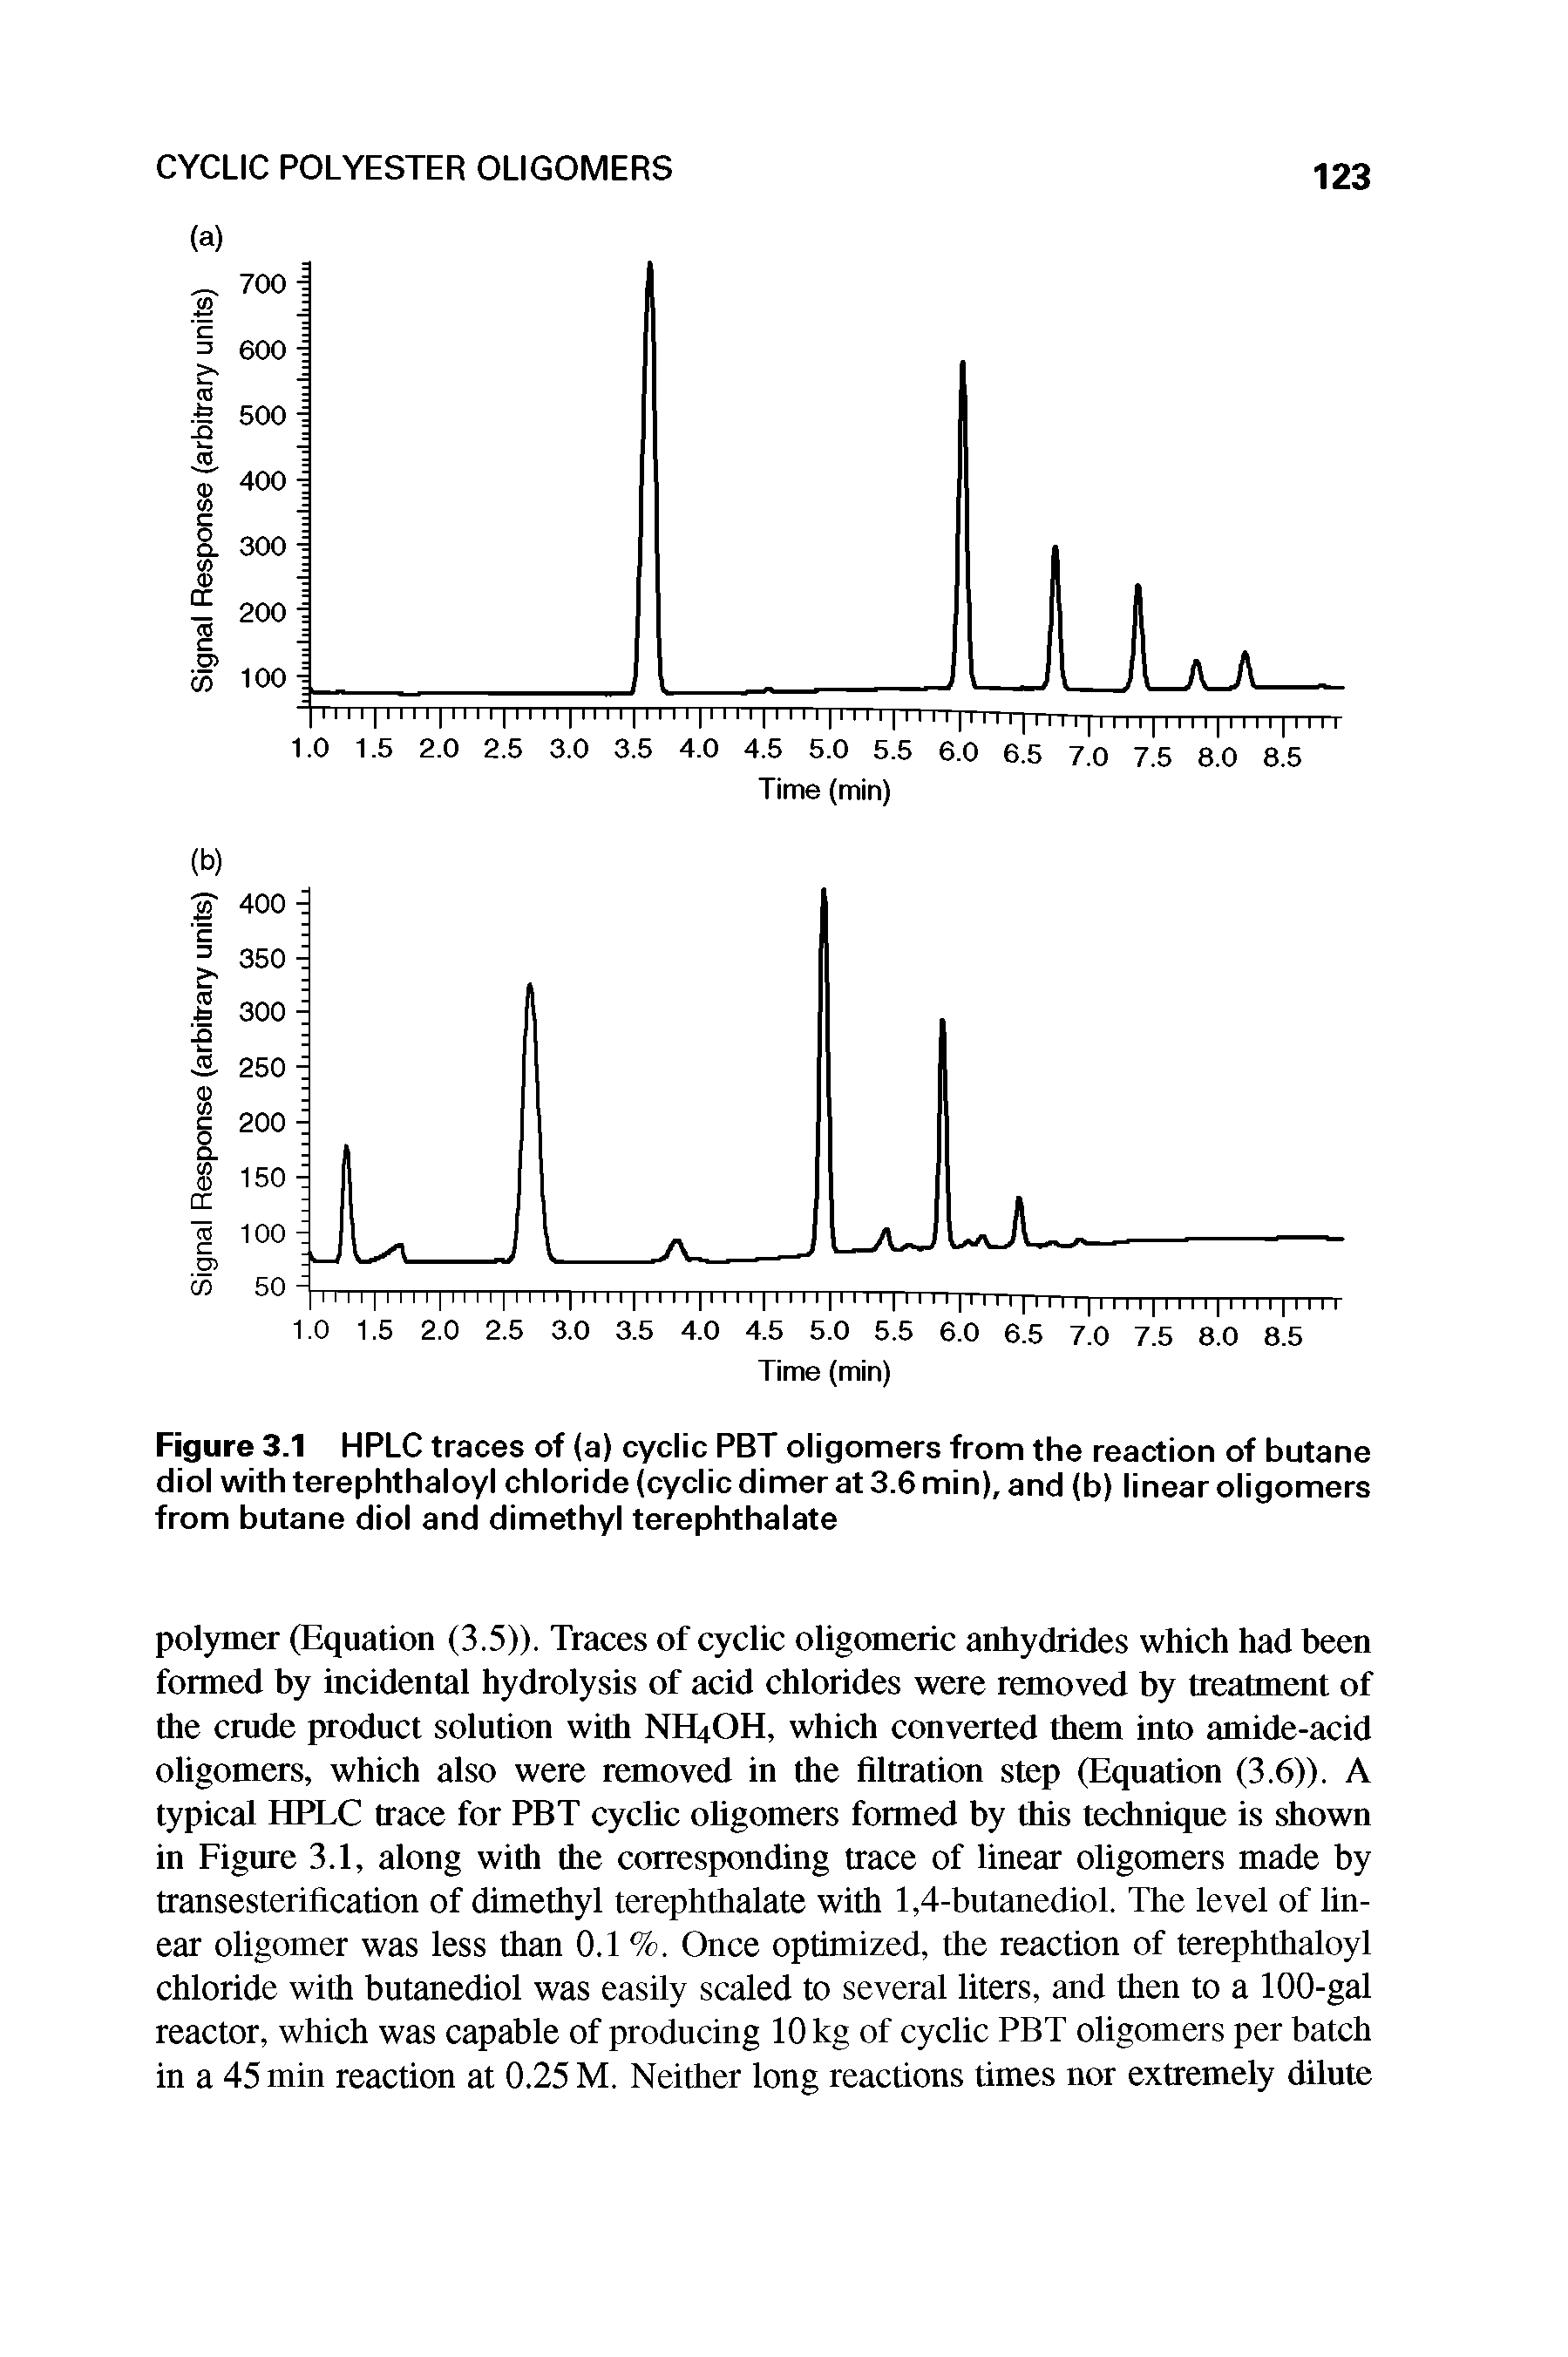 Figure 3.1 HPLC traces of (a) cyclic PBT oligomers from the reaction of butane diol with terephthaloyl chloride (cyclic dimer at 3.6 min), and (b) linear oligomers from butane diol and dimethyl terephthalate...